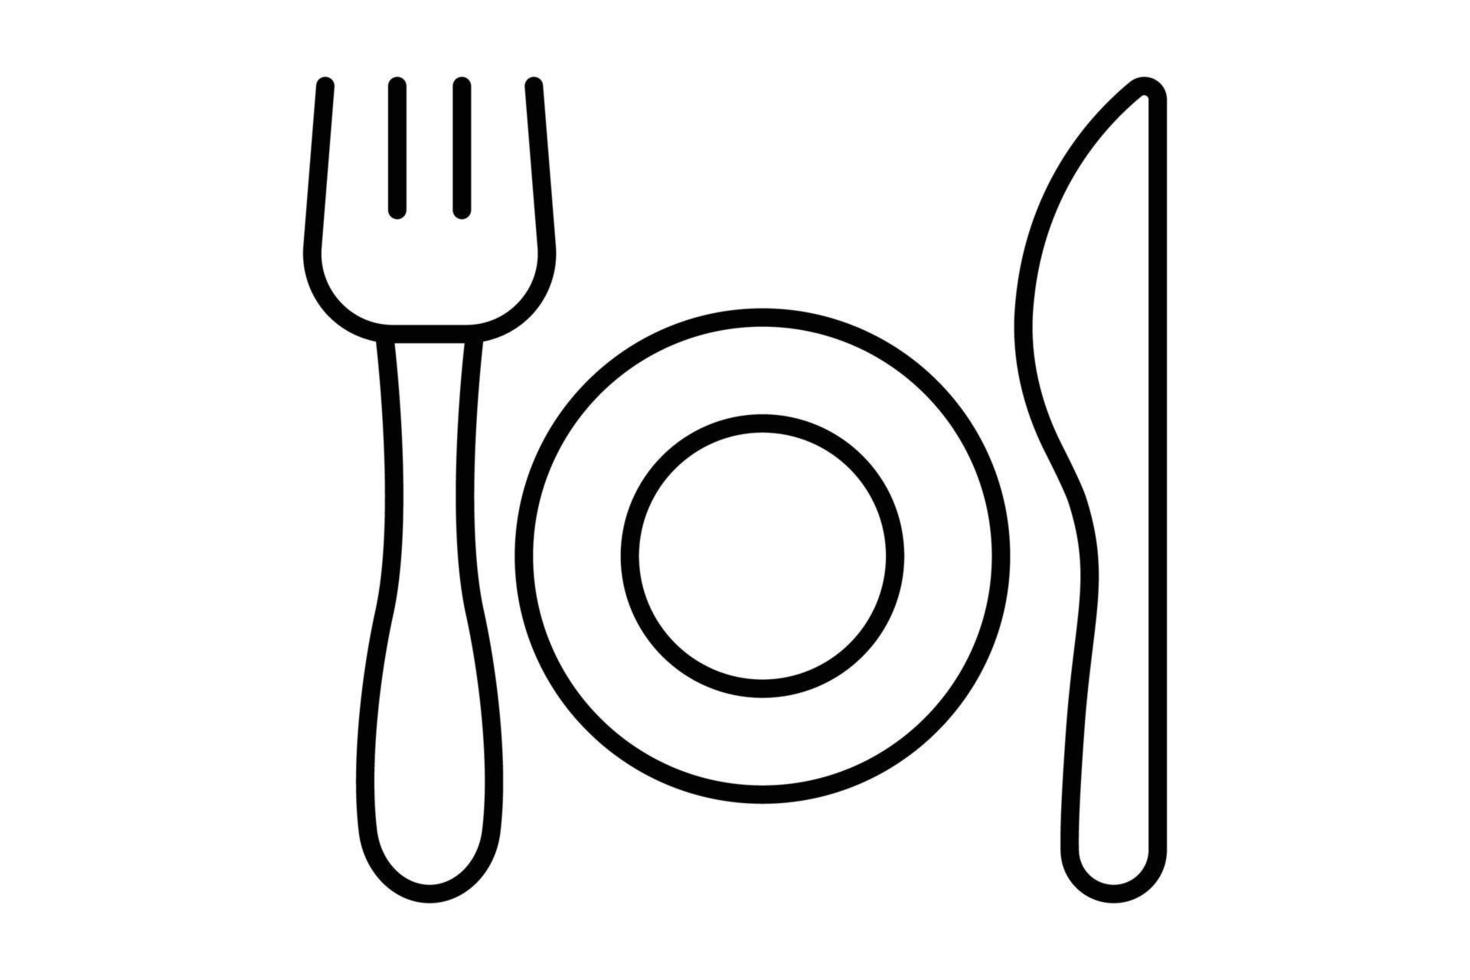 Breakfast icon illustration. cutlery, plates, knives. Line icon style. Simple vector design editable